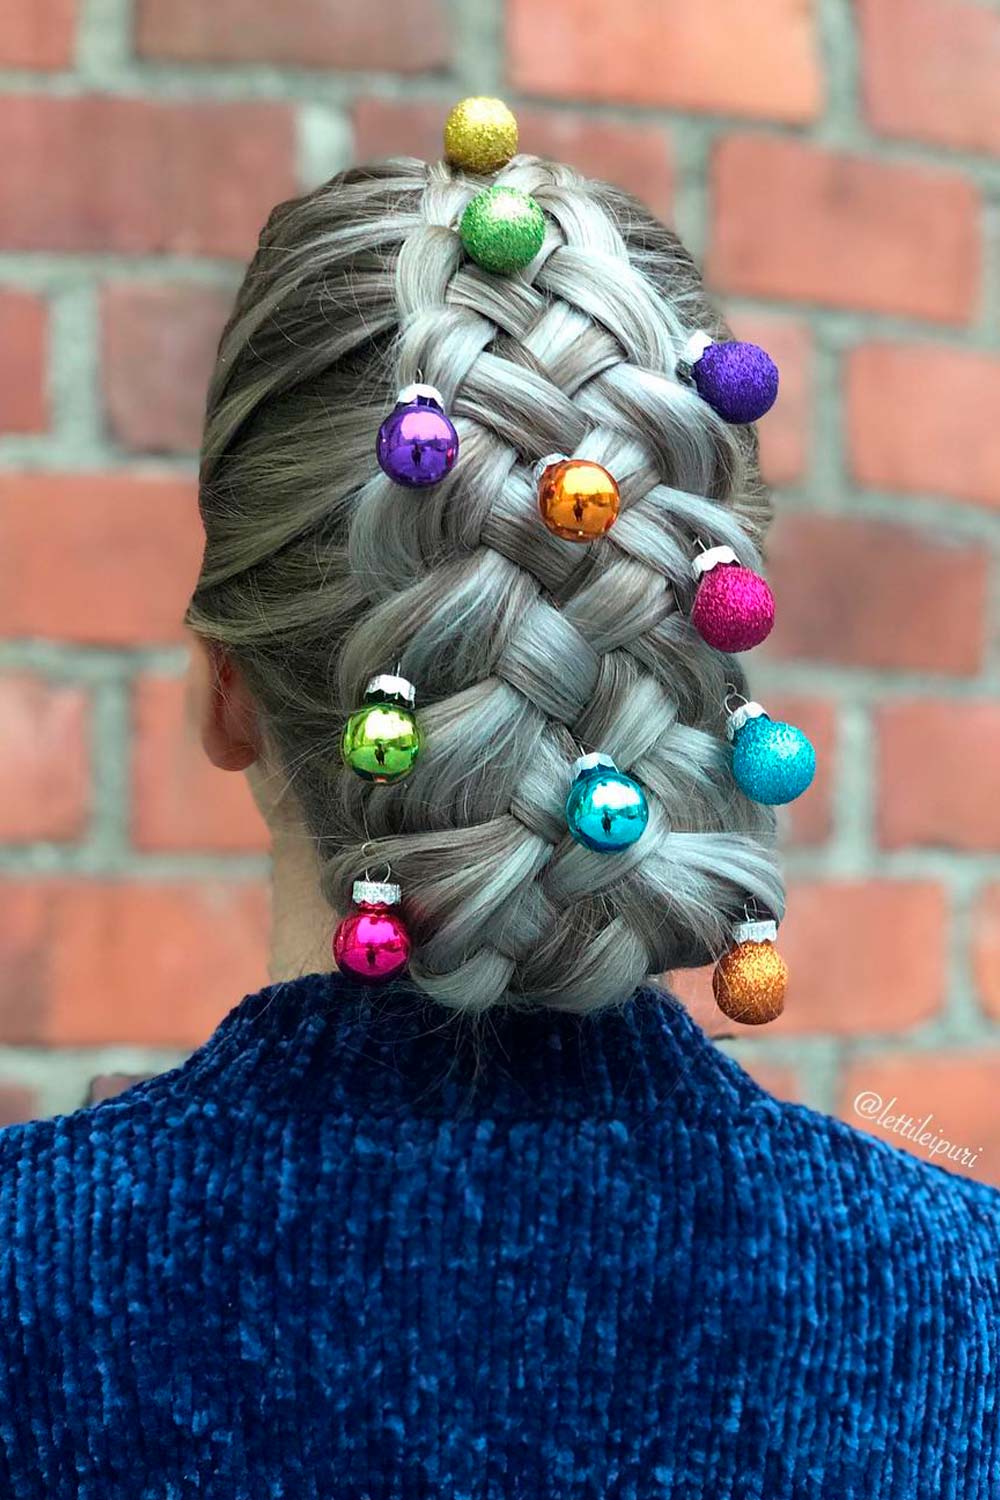 Is there a more Christmas-y hairstyle than the one styled like a Christmas tree?